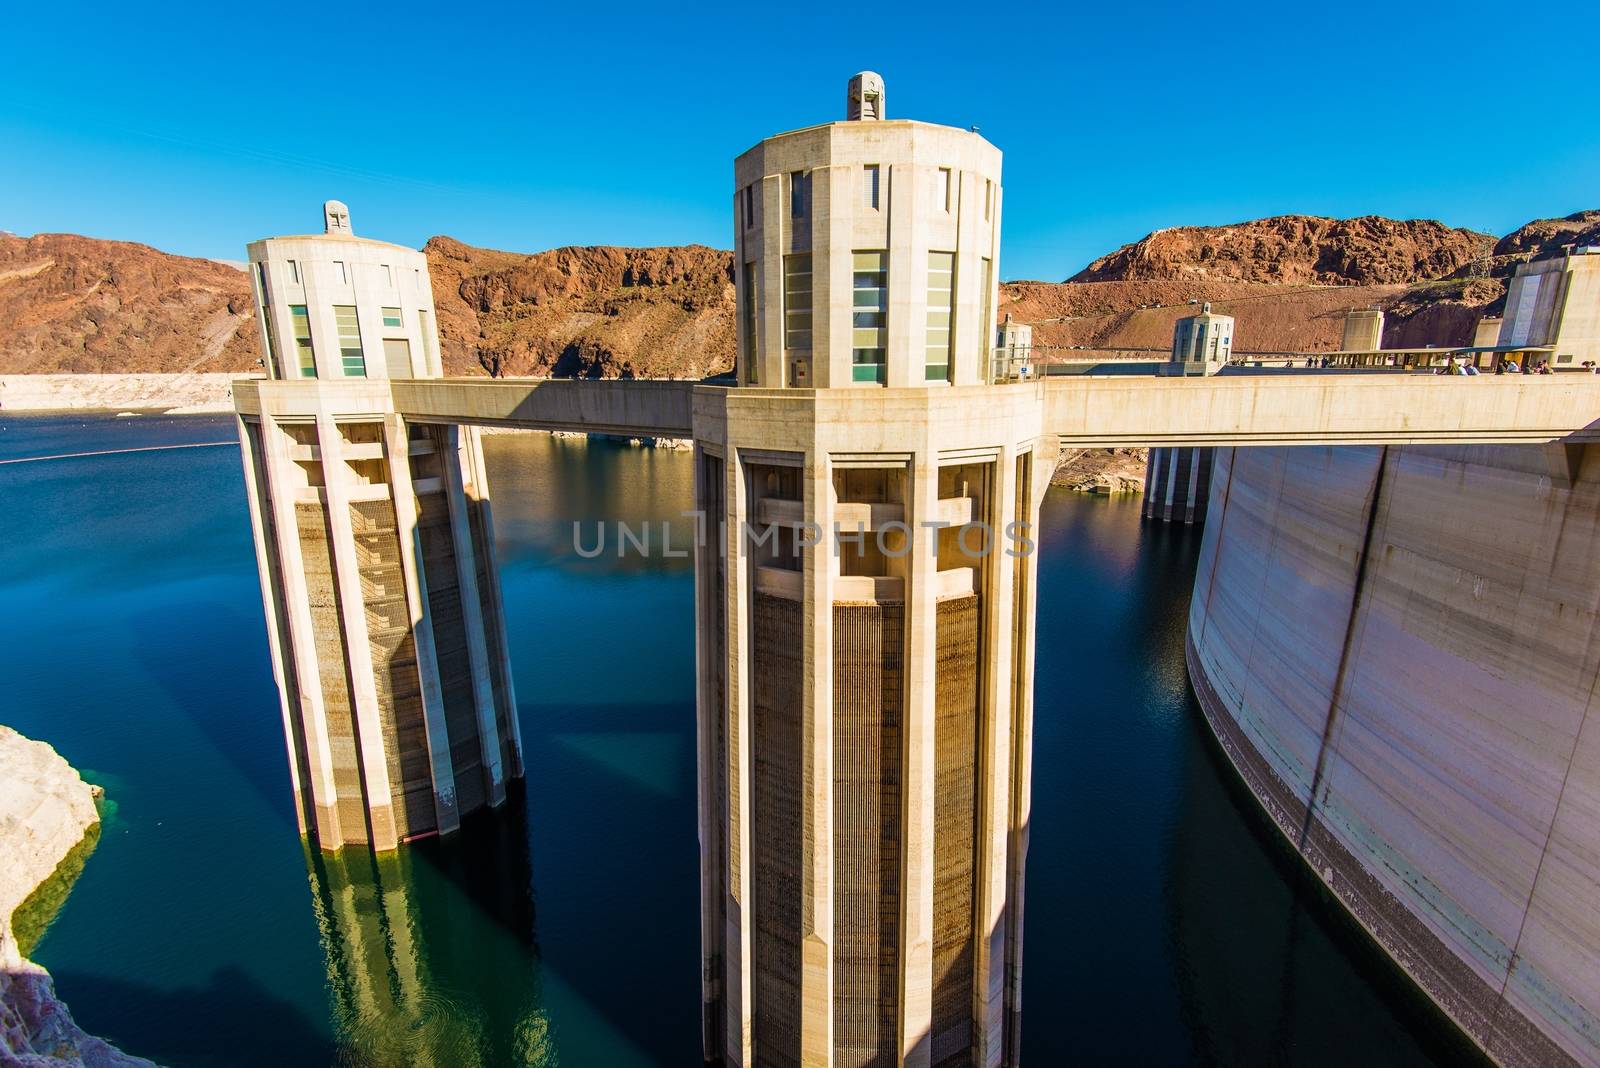 Hoover Dam Intake Towers by welcomia